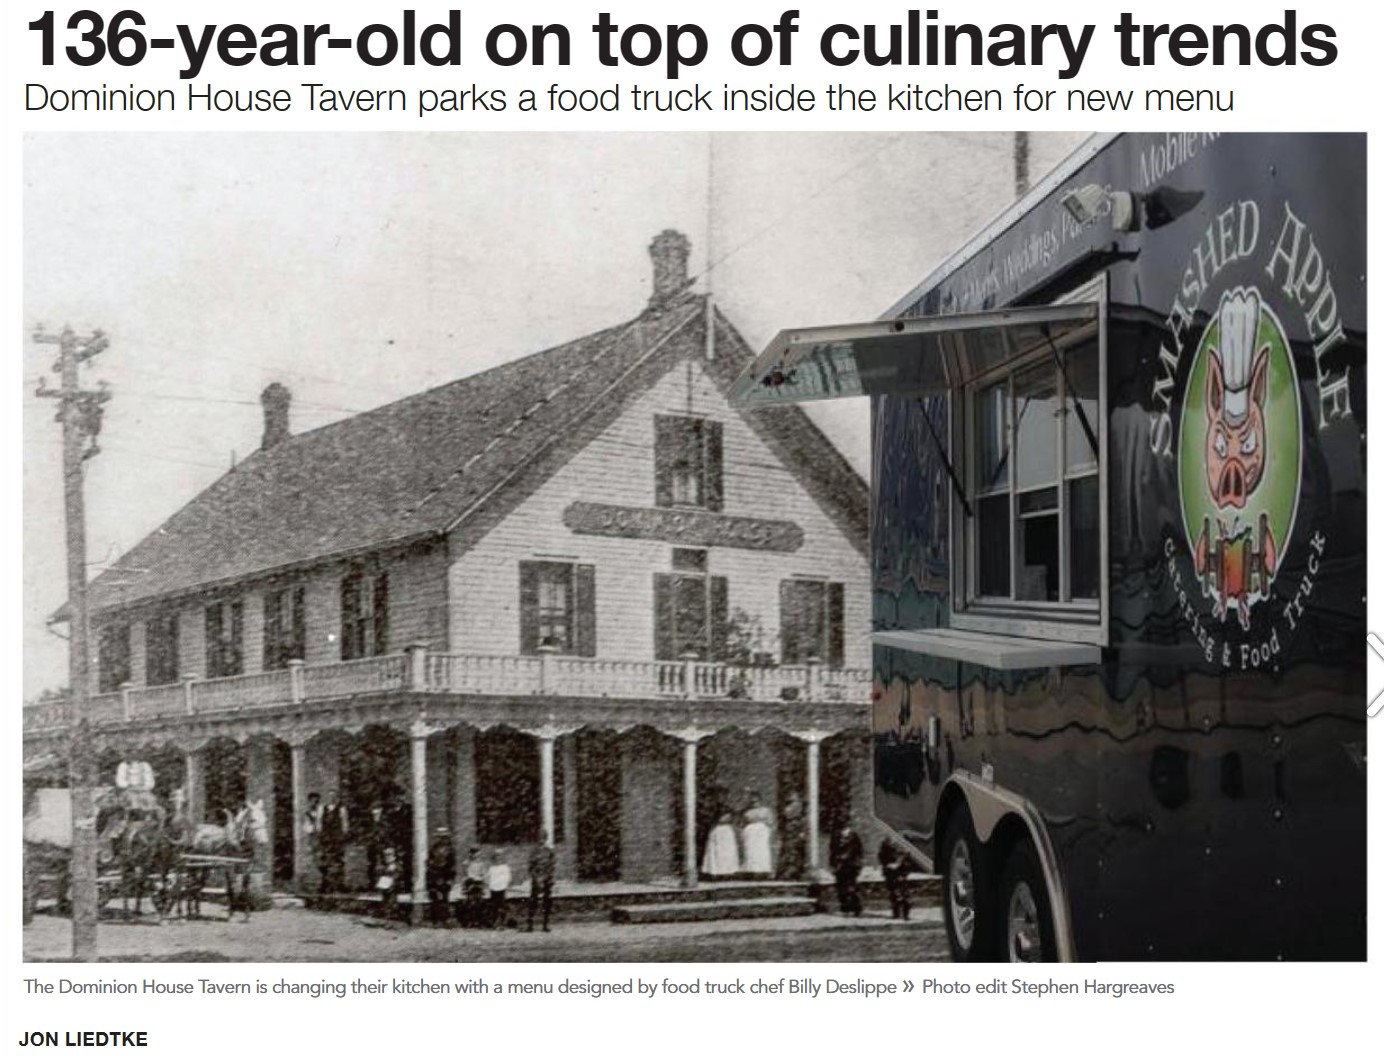 The Urbanite: 136-year-old on top of culinary trends